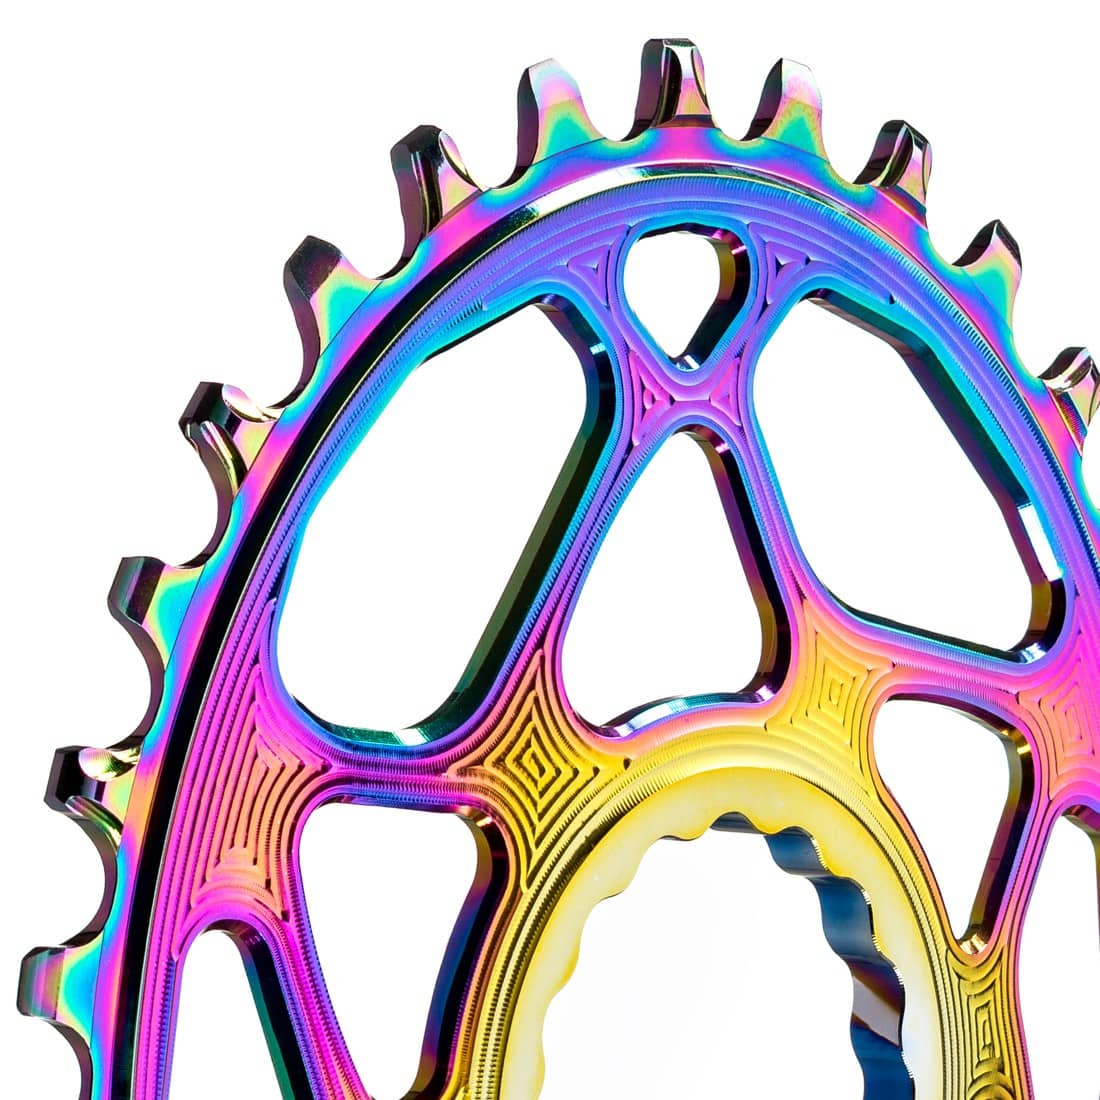 absoluteblack OVAL BOOST narrow wide direct mount cinch chainring for Race Face Rainbow